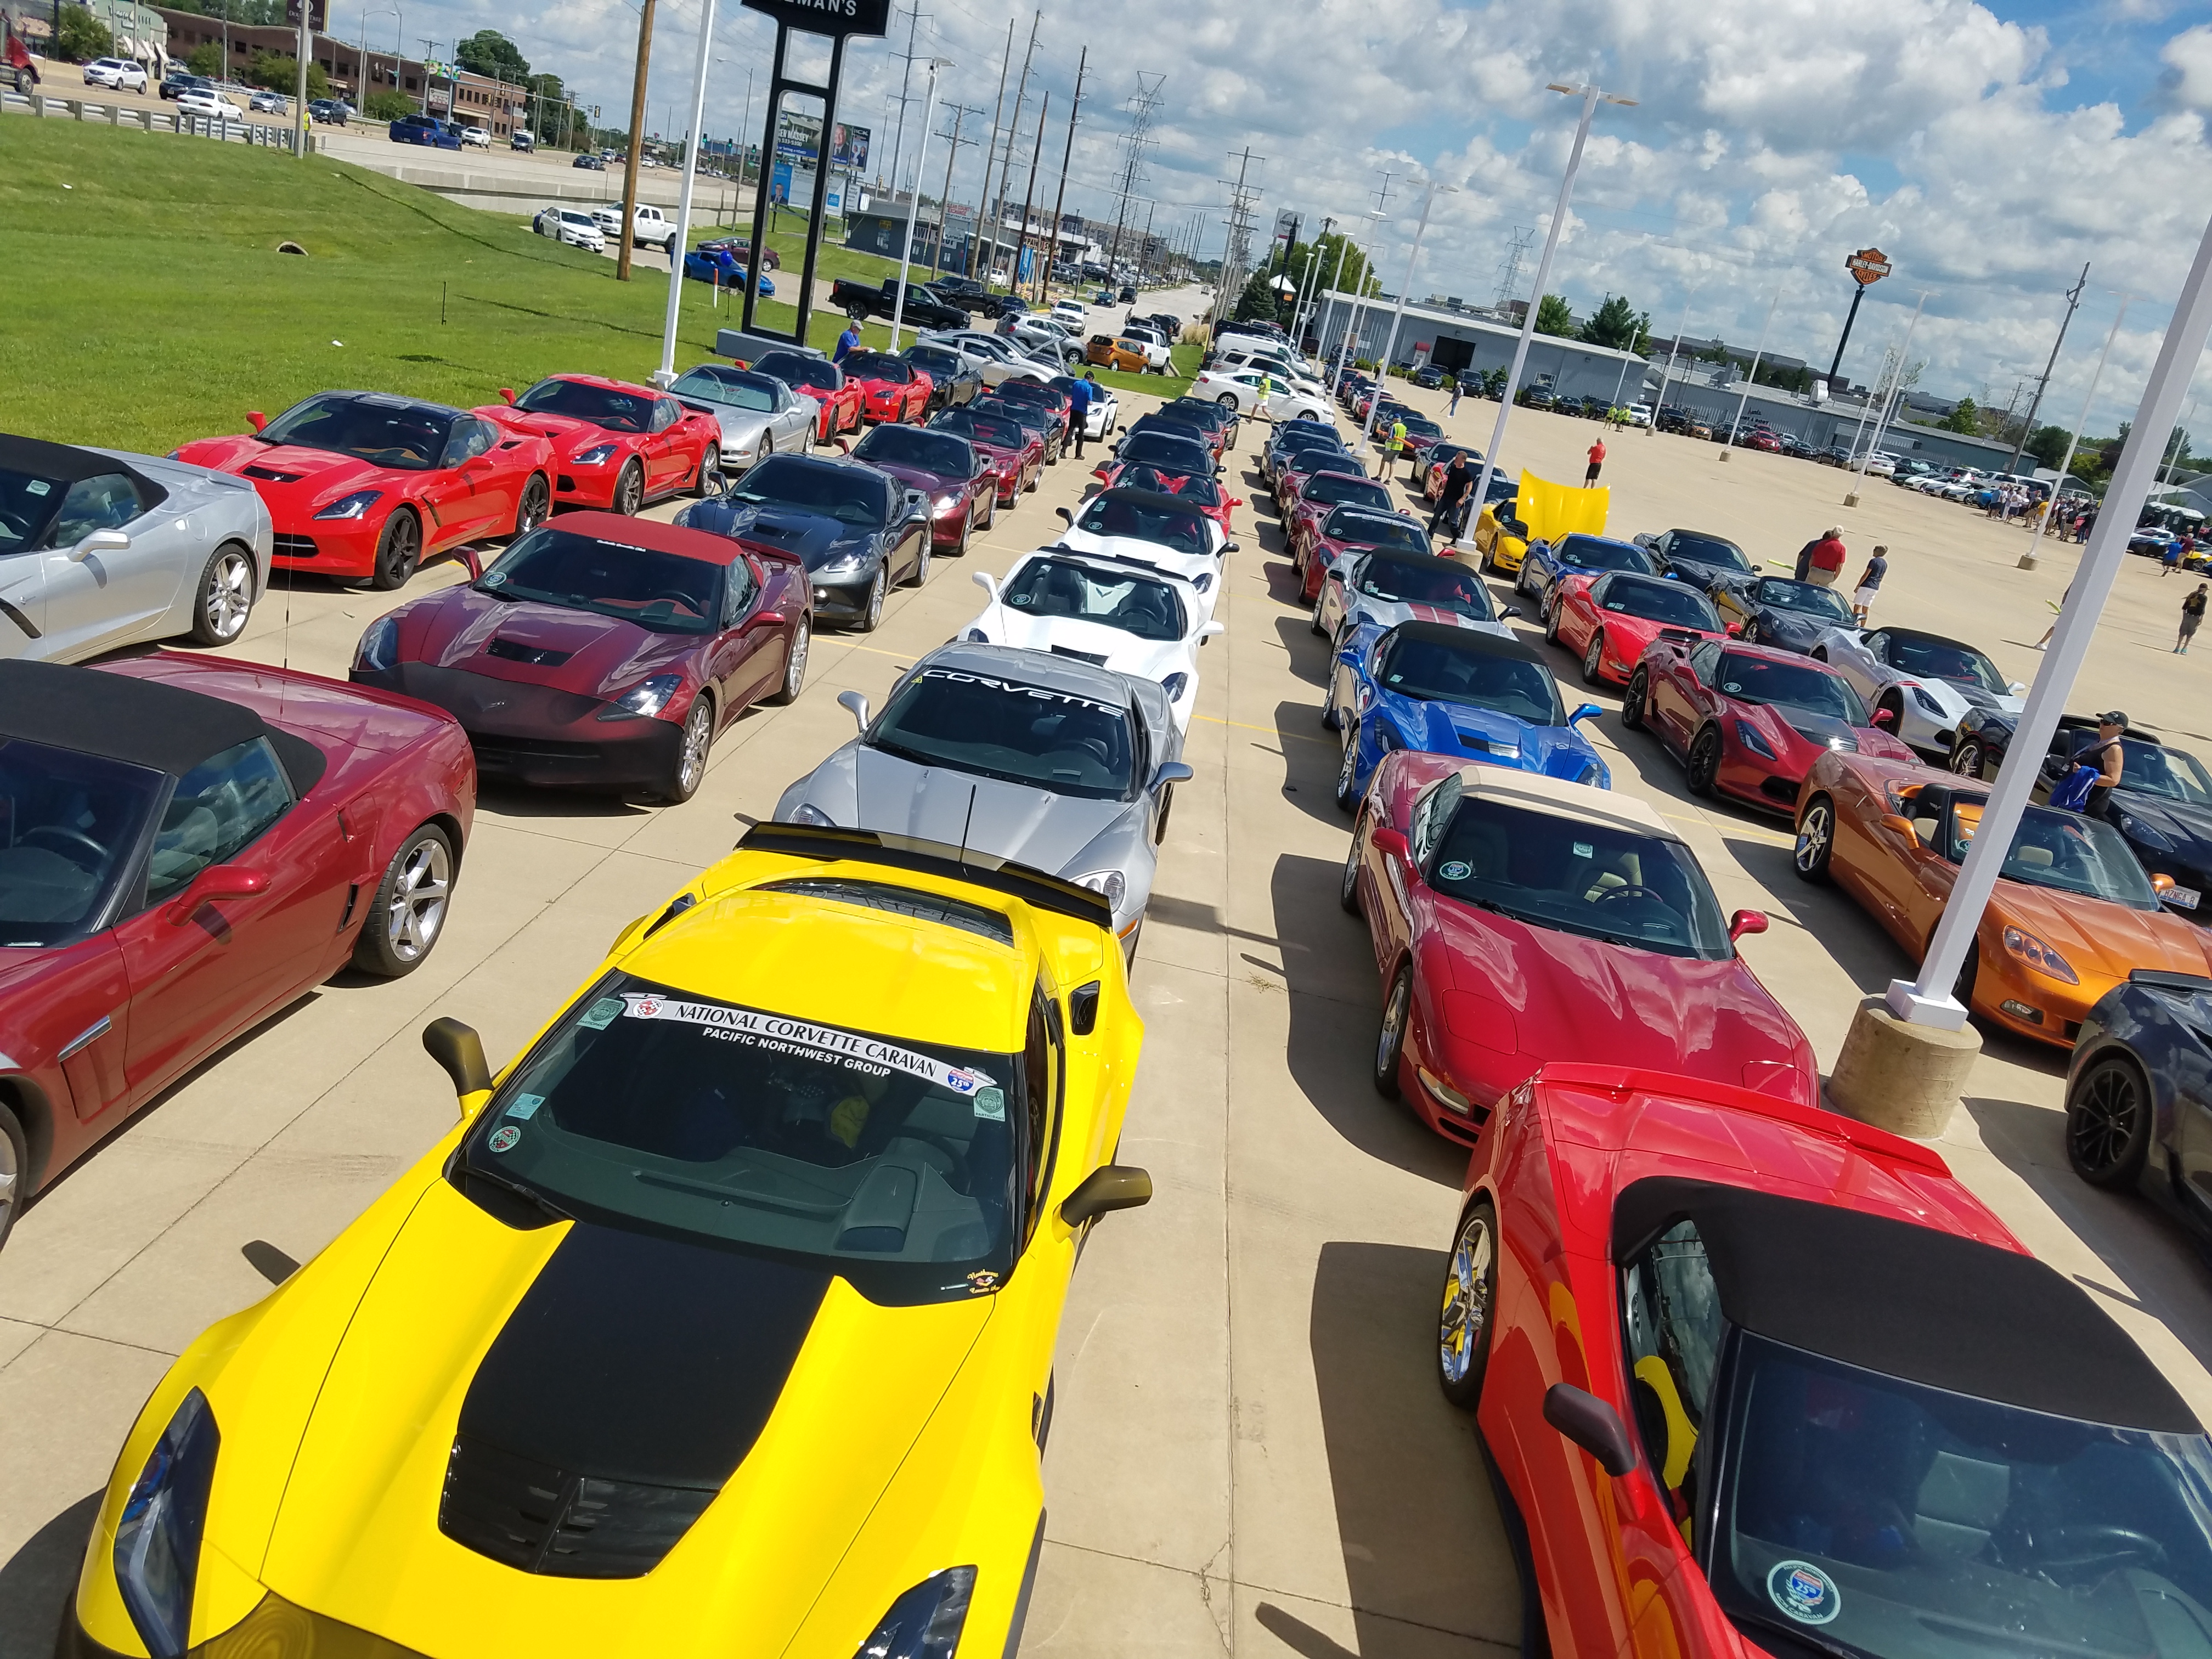 Corvettes by the mile!